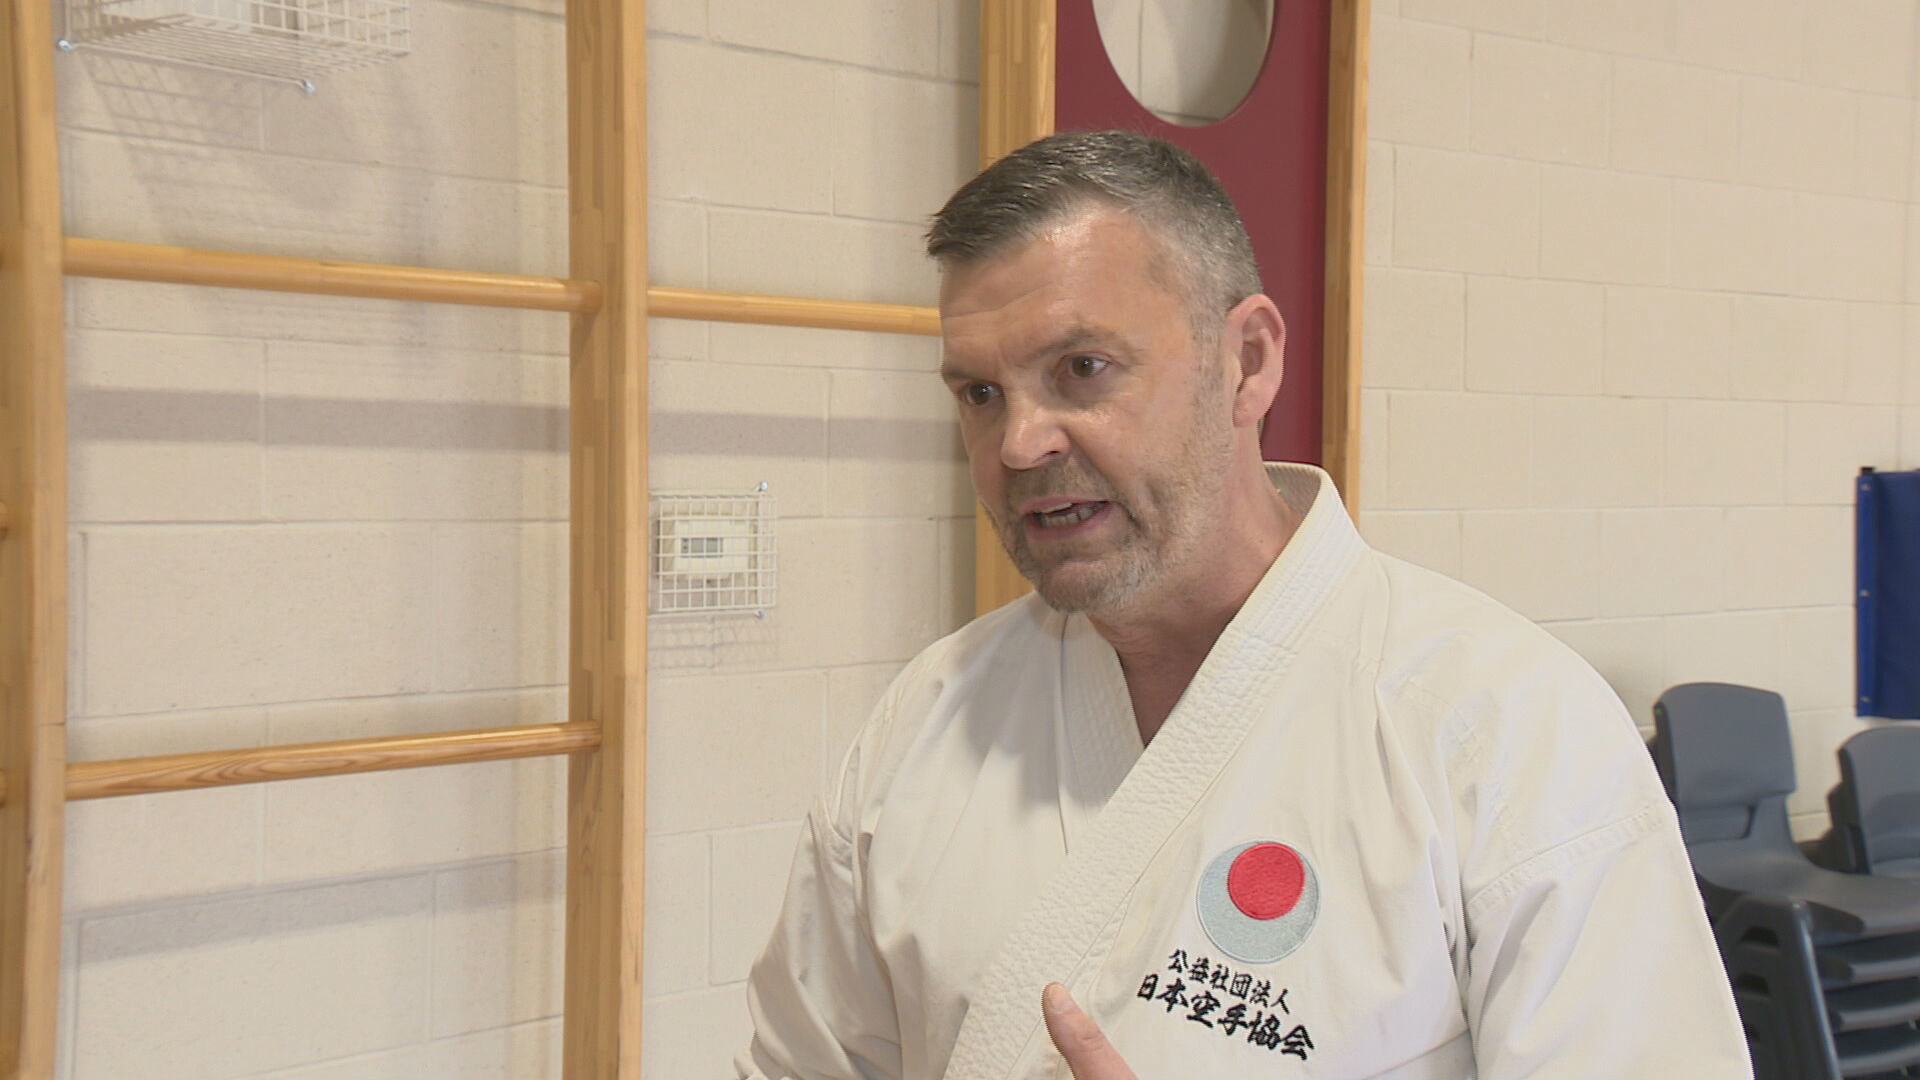 Karate instructor Billy Wales said pupils are 'a credit' to their school and families